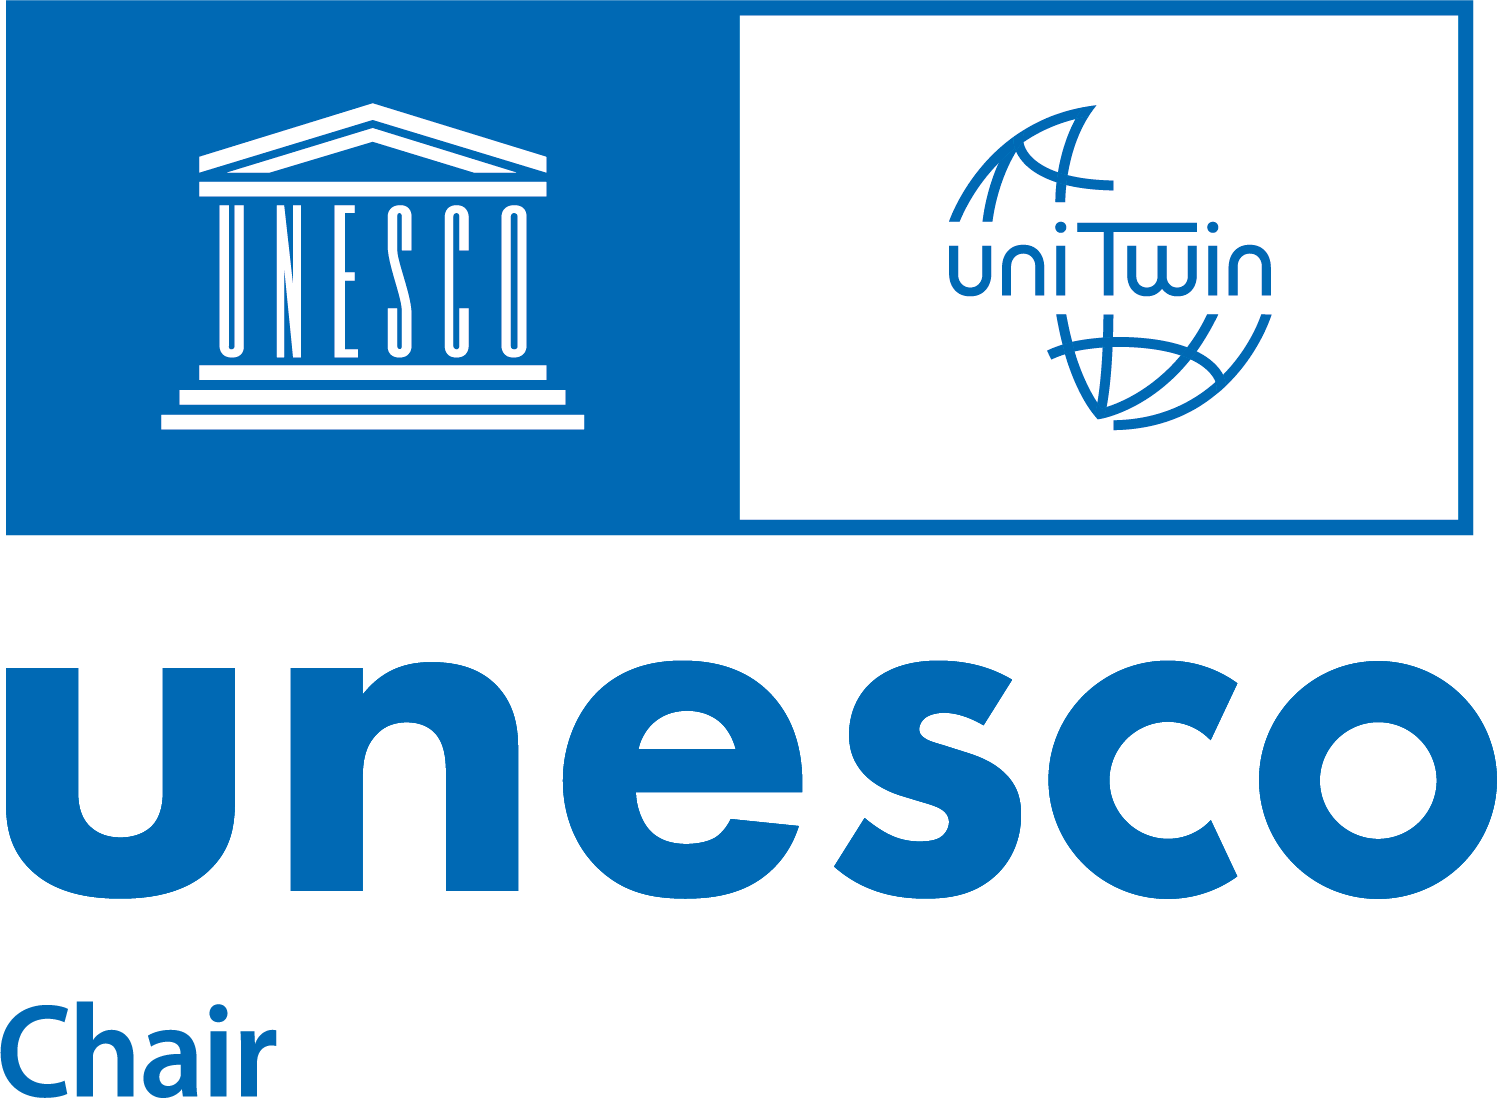 UNESCO Chair in Interculturality, Good Governance and Sustainable Development